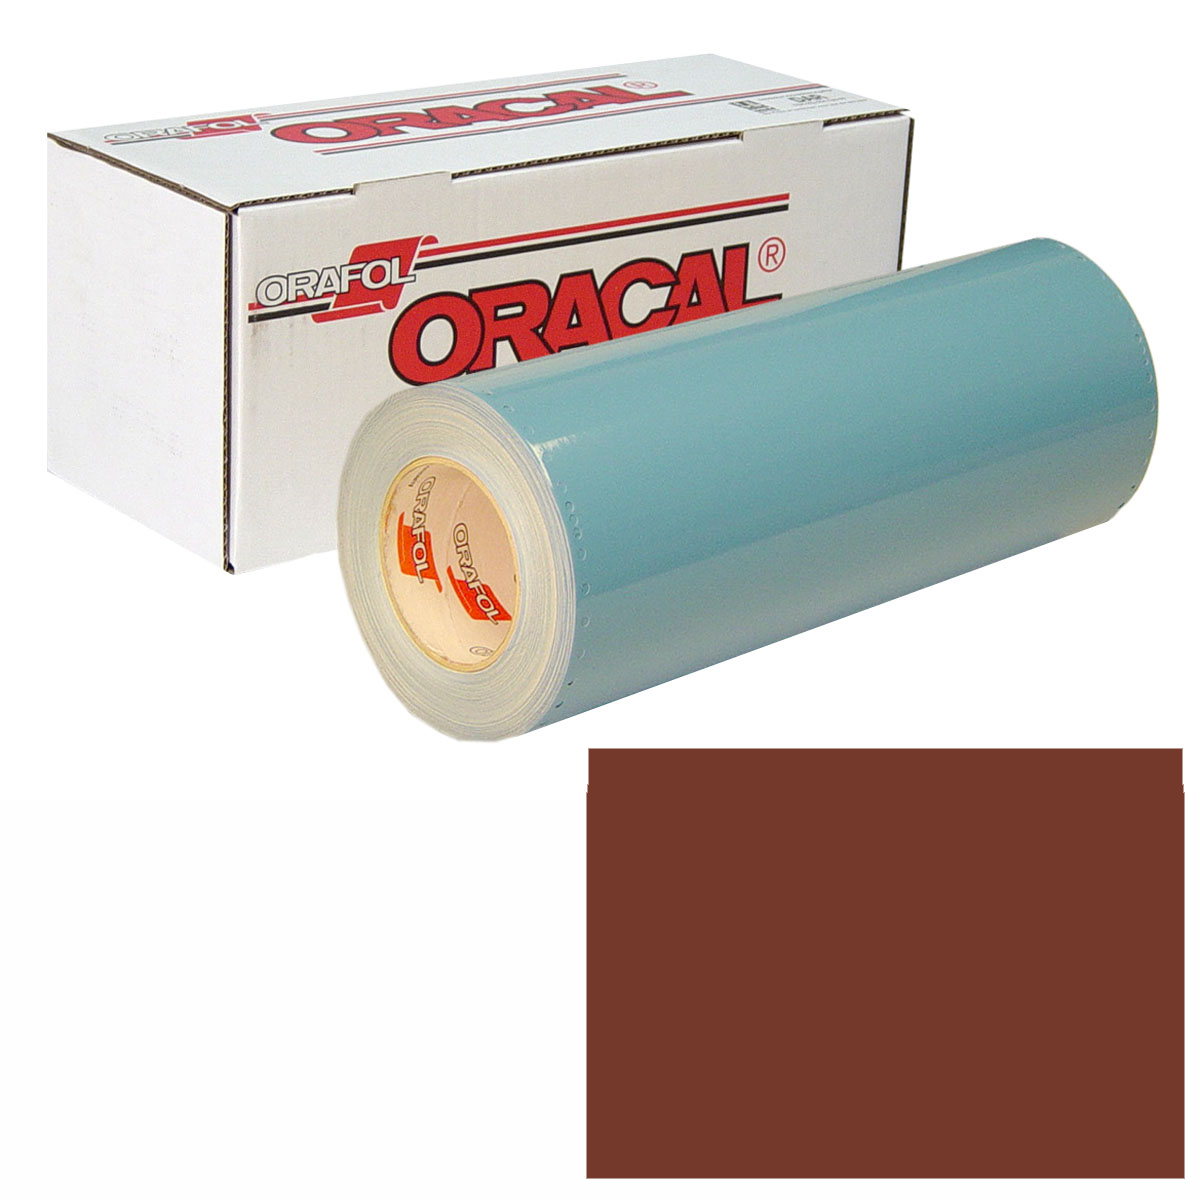 ORACAL 951 30in X 50yd 079 Red Brown